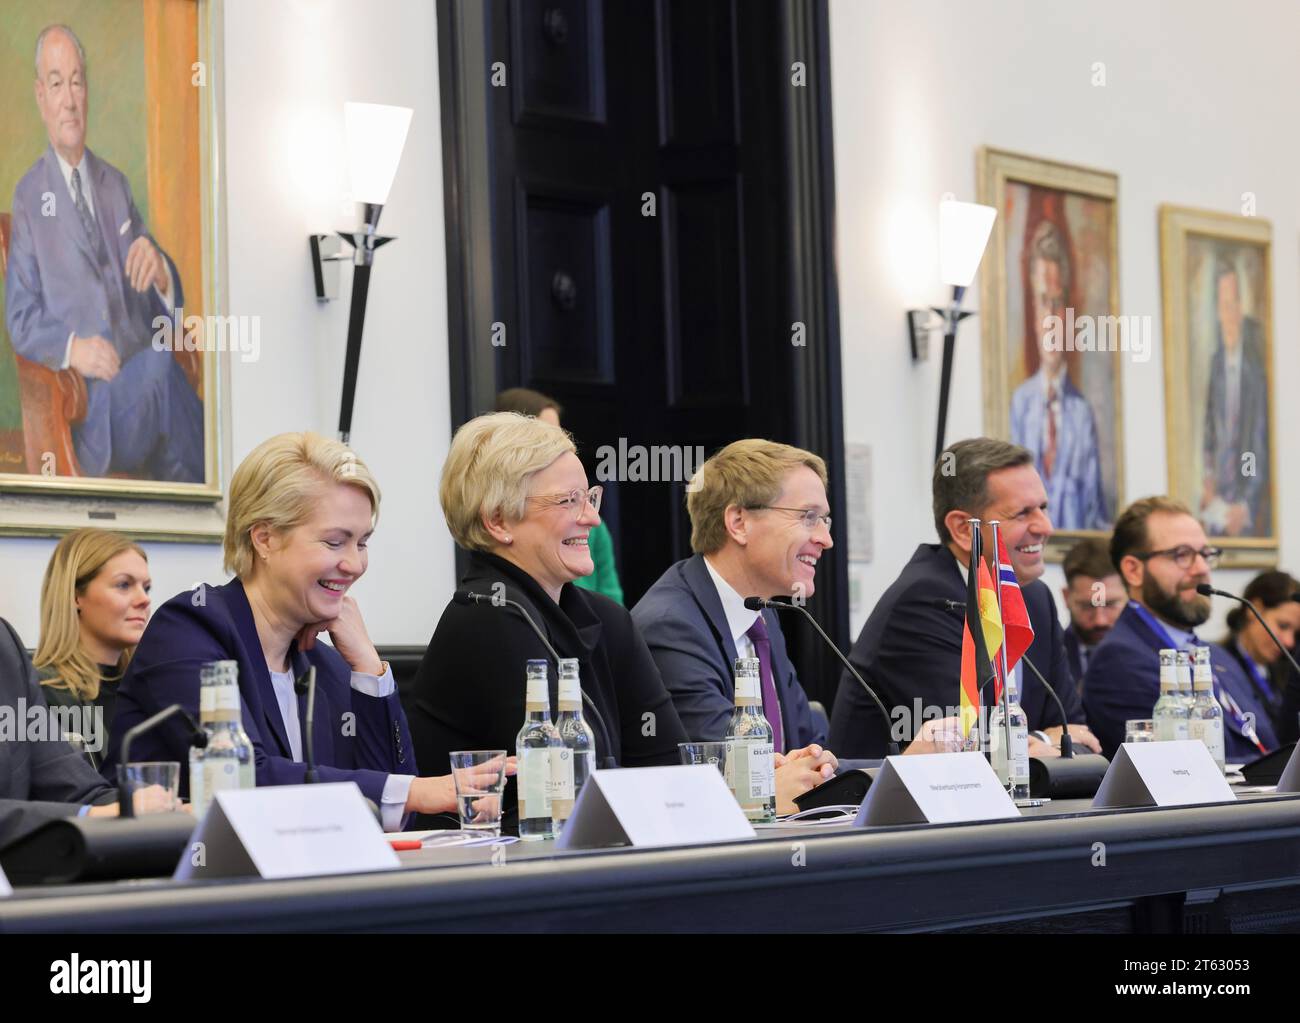 Hamburg, Germany. 08th Nov, 2023. Manuela Schwesig (SPD, l-r), Minister President of Mecklenburg-Western Pomerania, Almut Möller (SPD), State Councillor and Plenipotentiary of the Free and Hanseatic City of Hamburg, Daniel Günther (CDU), Minister President of Schleswig-Holstein, and Olaf Lies (SPD), Minister for the Environment, Energy, Building and Climate Protection in Lower Saxony, smile at an economic policy roundtable in the Chamber of Commerce. The Norwegian Crown Prince has come to Germany for a four-day visit. Credit: Christian Charisius/dpa/Alamy Live News Stock Photo